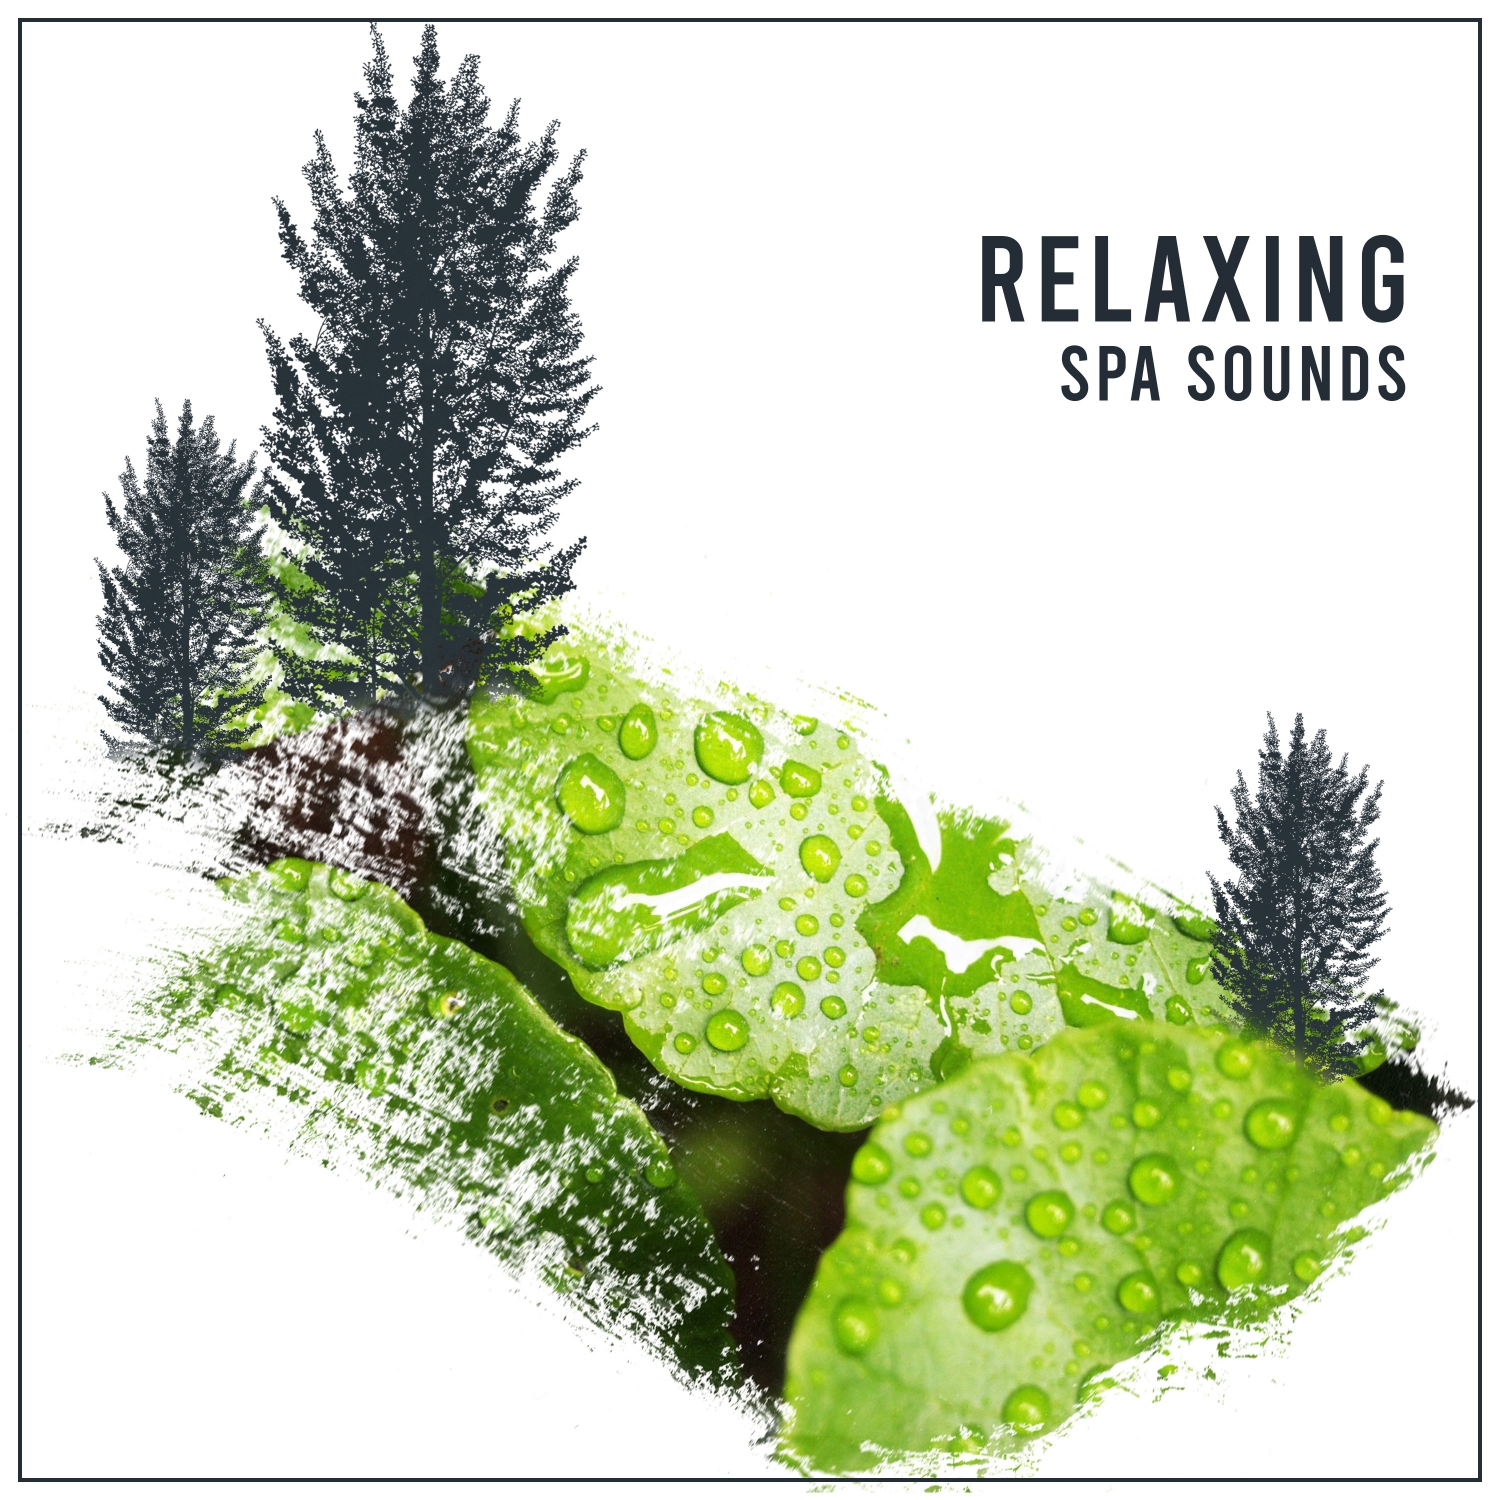 14 Relaxing Spa Sounds, Meditate, Massage, Relax and Practise Yoga and Mindfulness